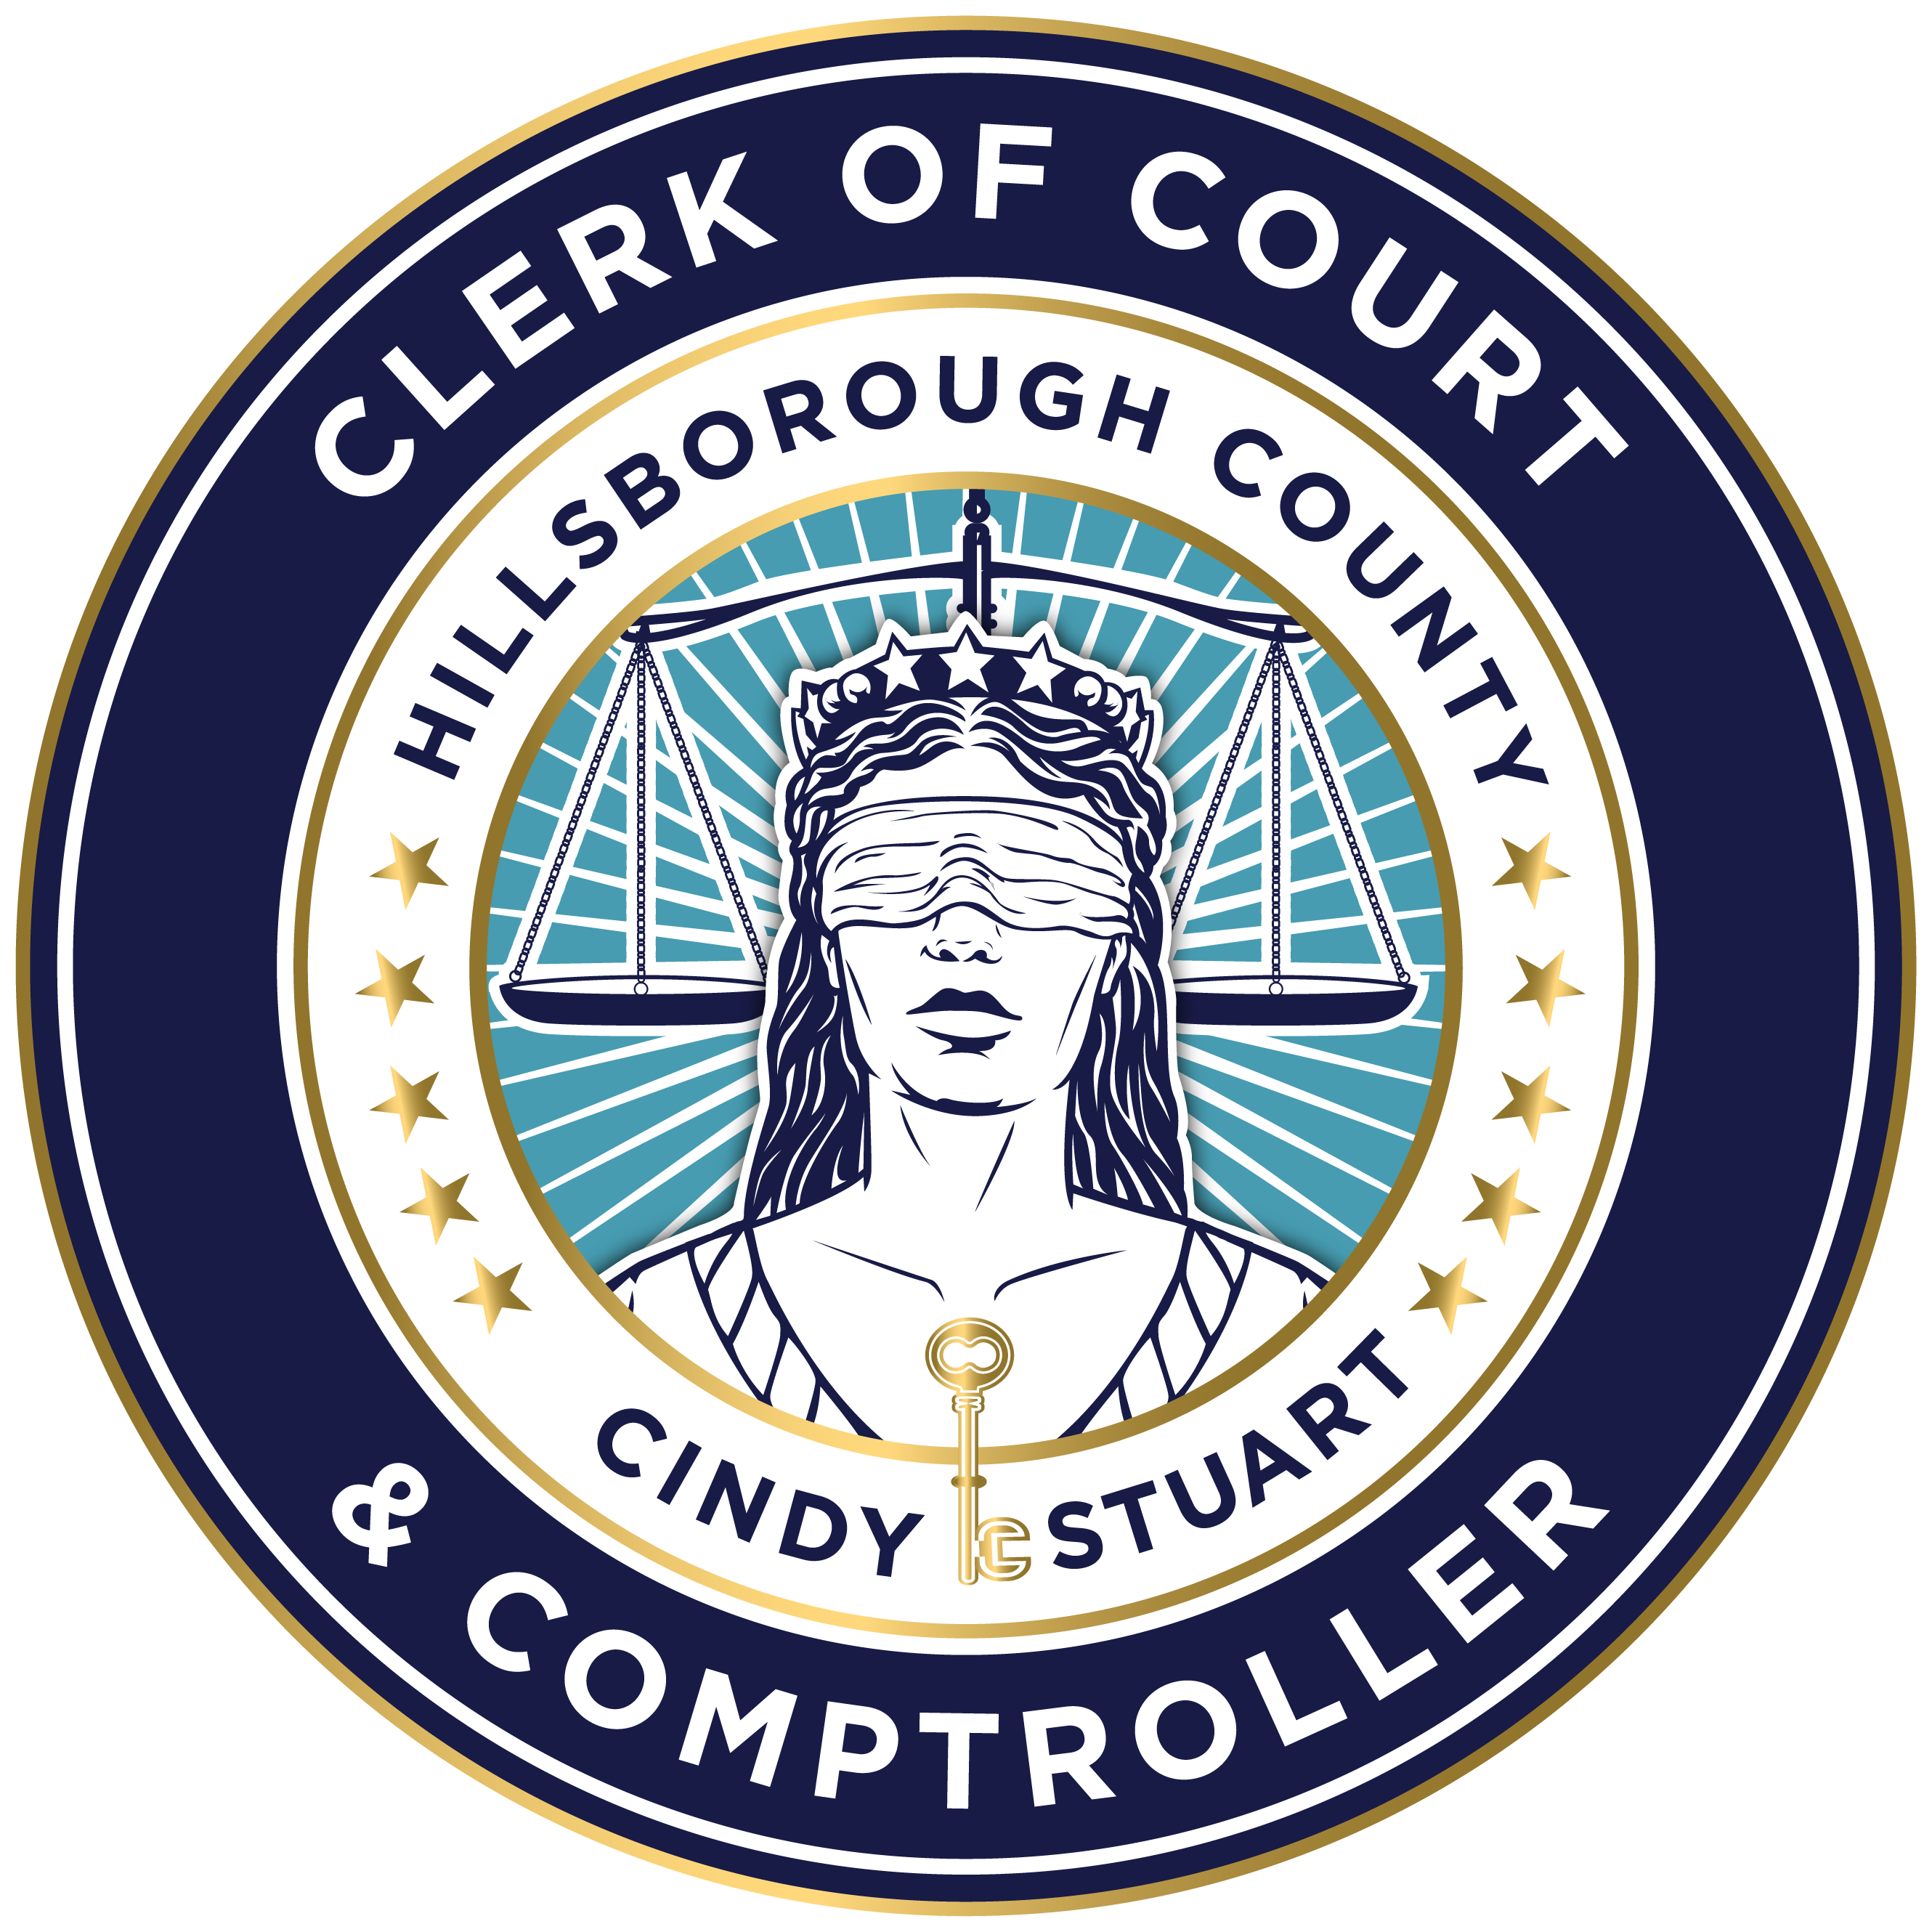 Hillsborough County Clerk of Court and Comptroller logo